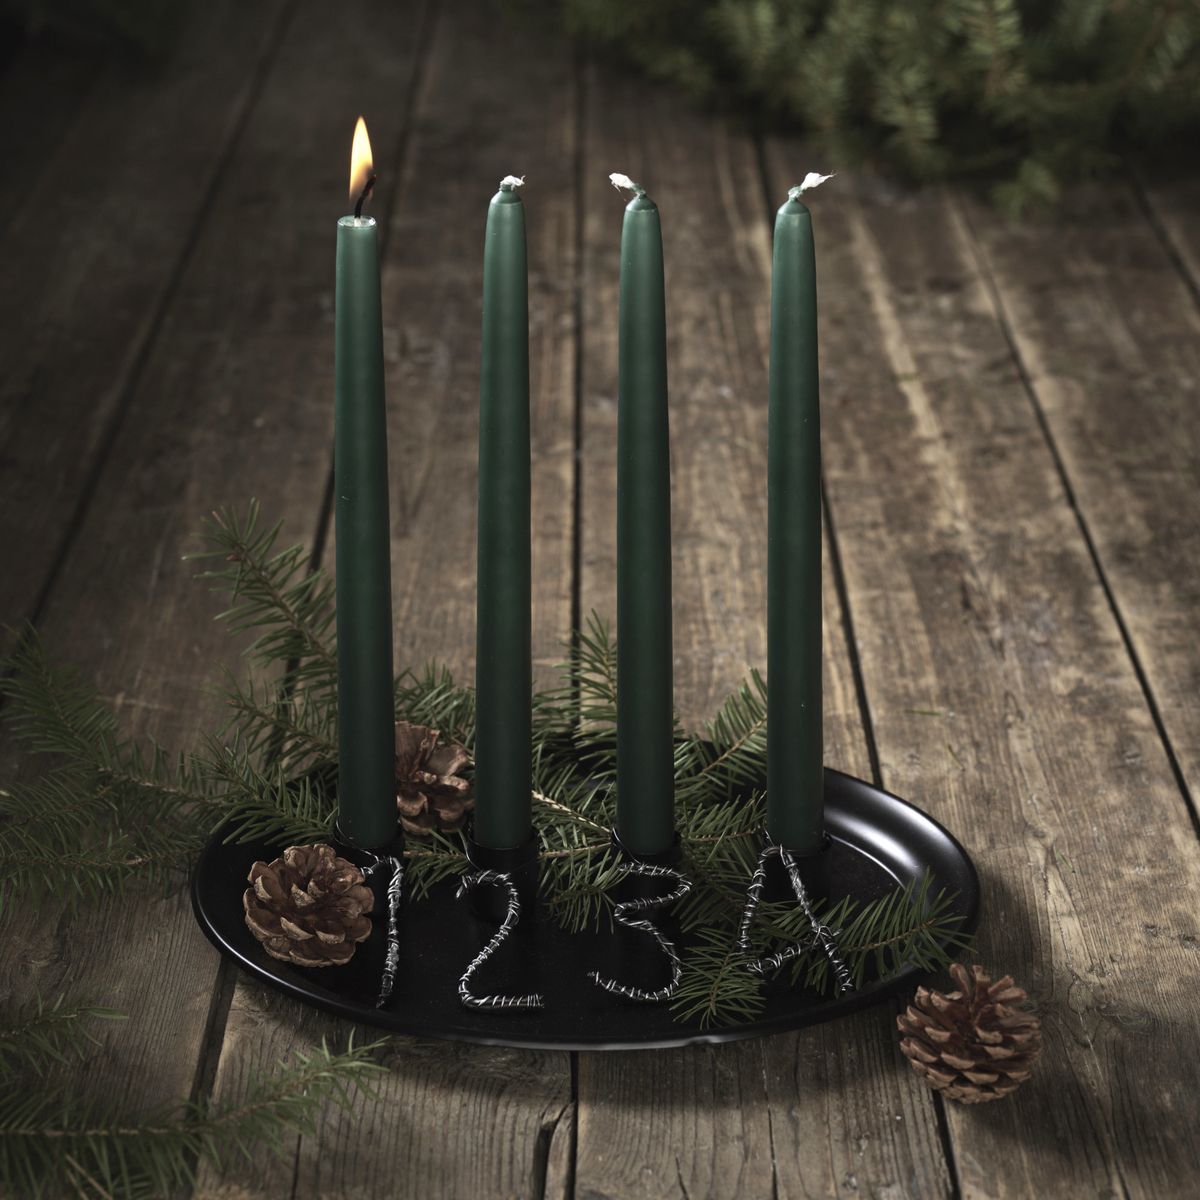 Make your own Advent candle holder